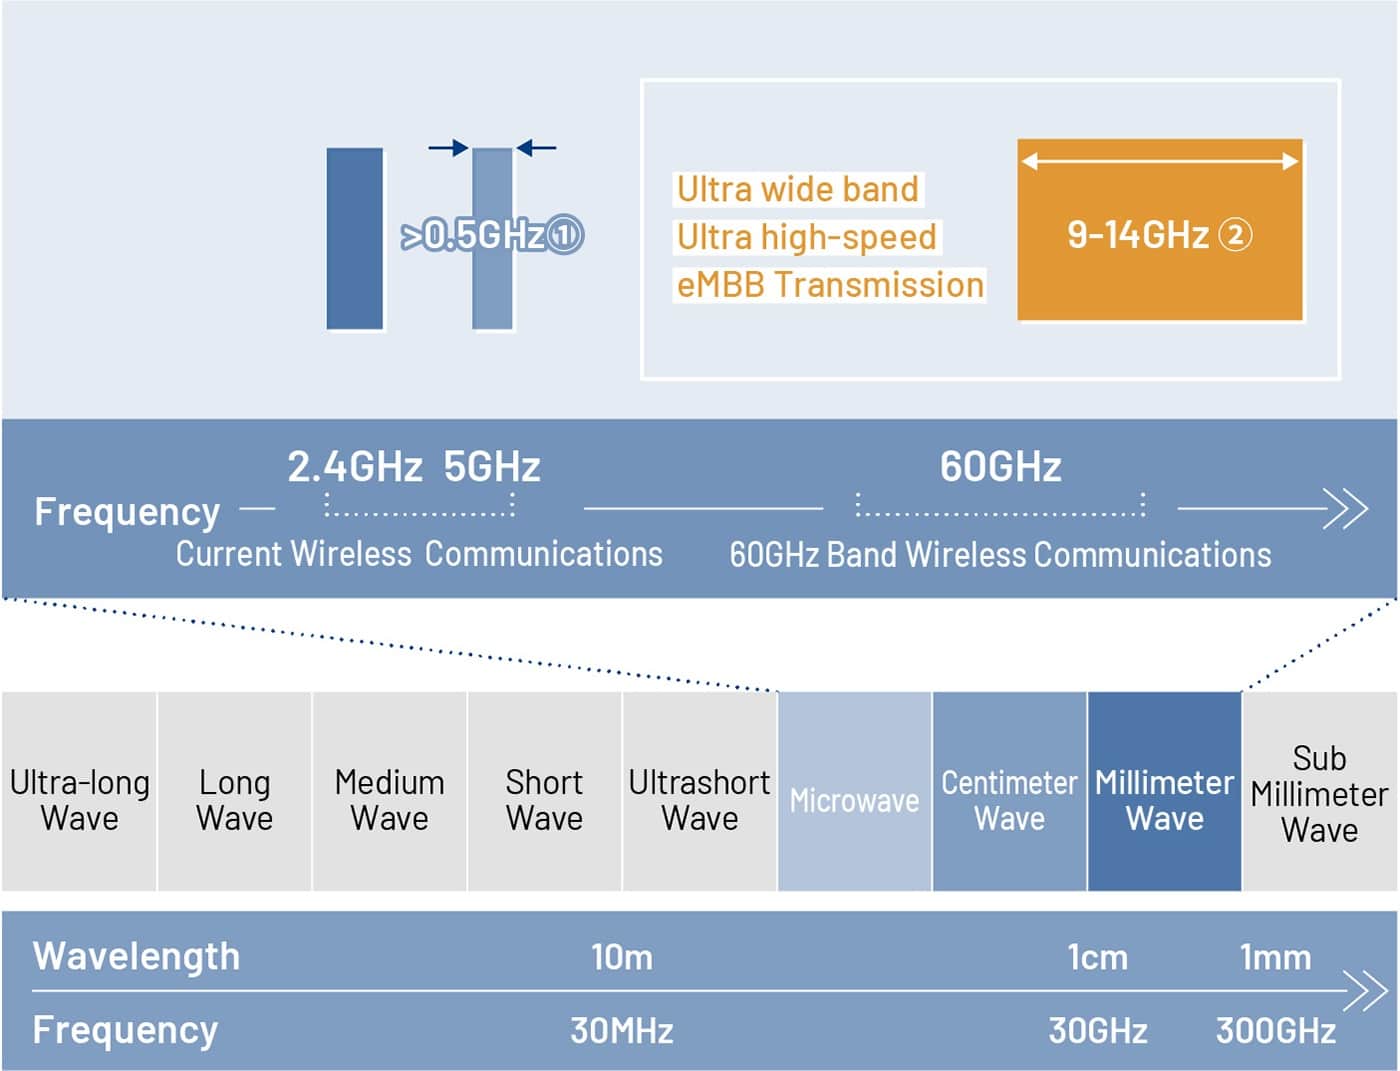 Frequency bands used in wireless communications